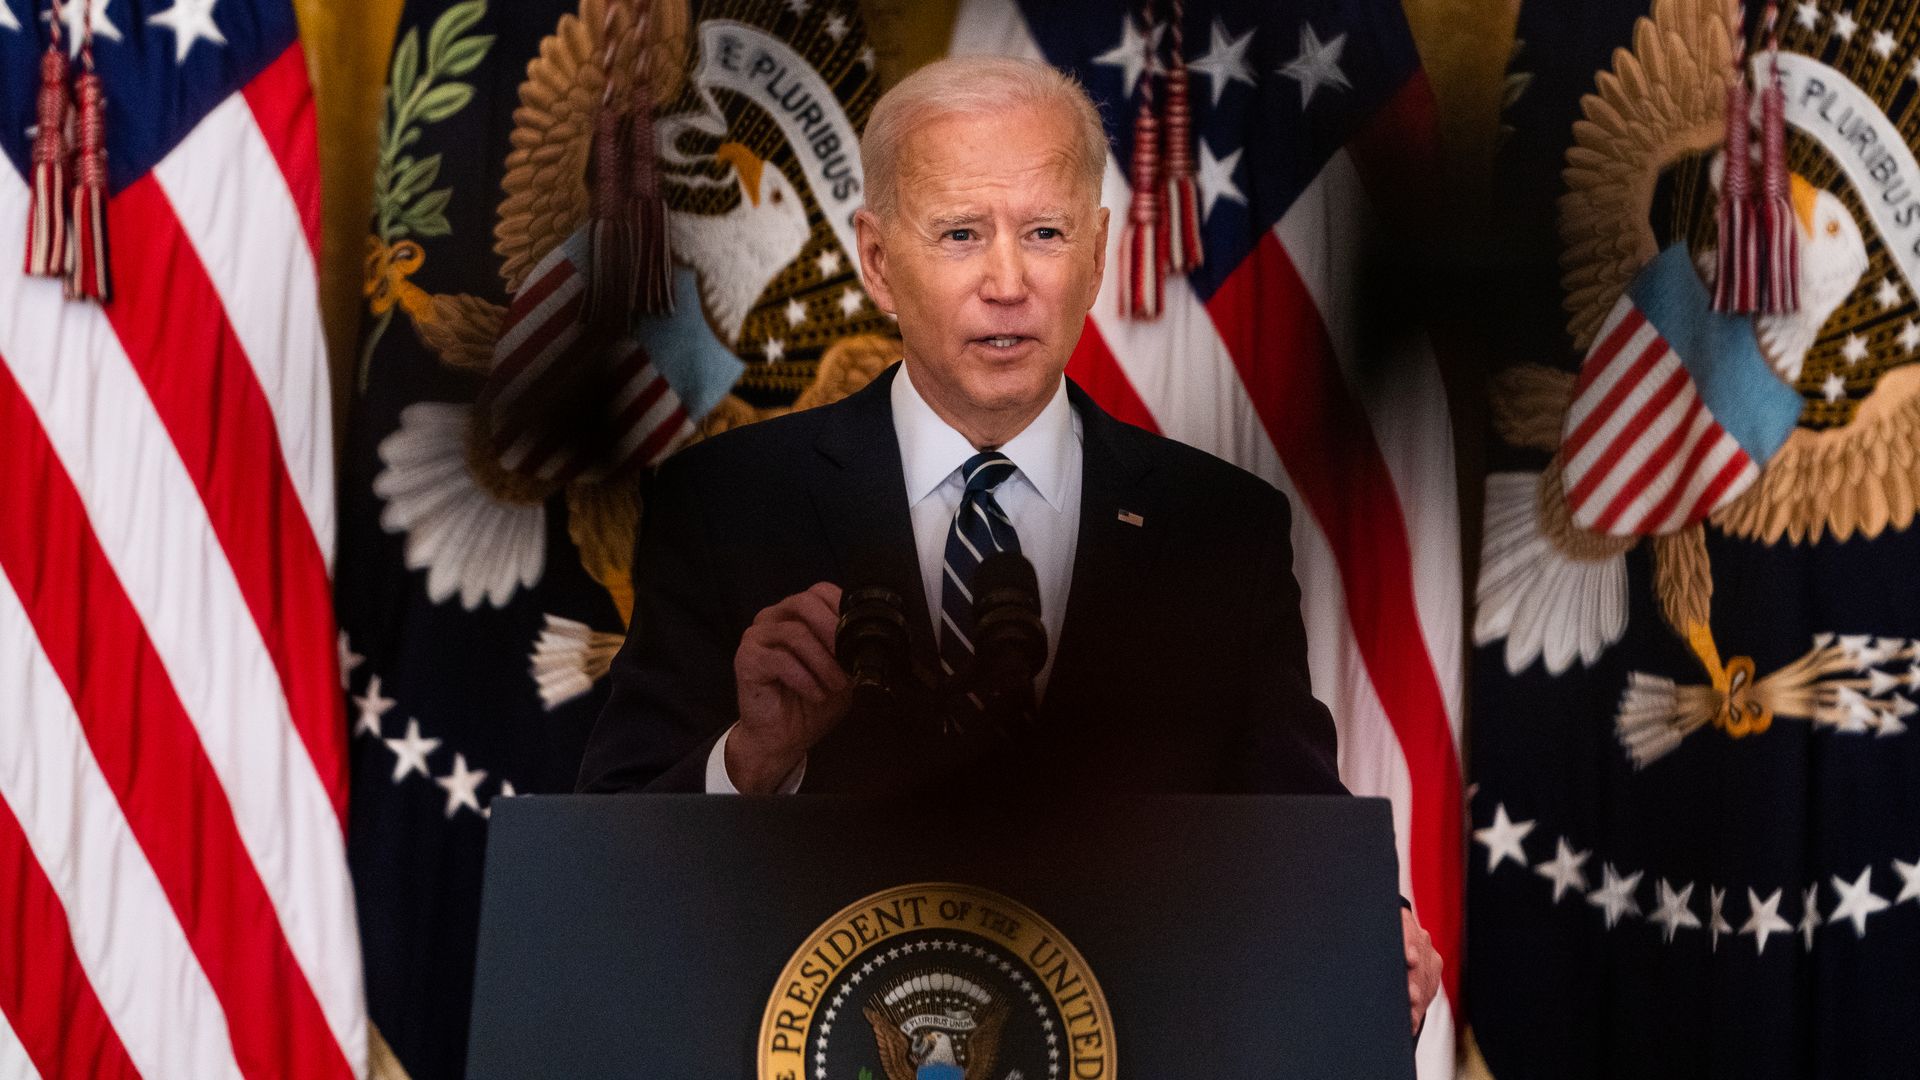 President Biden speaks at a podium with the presidential seal and flags in the background